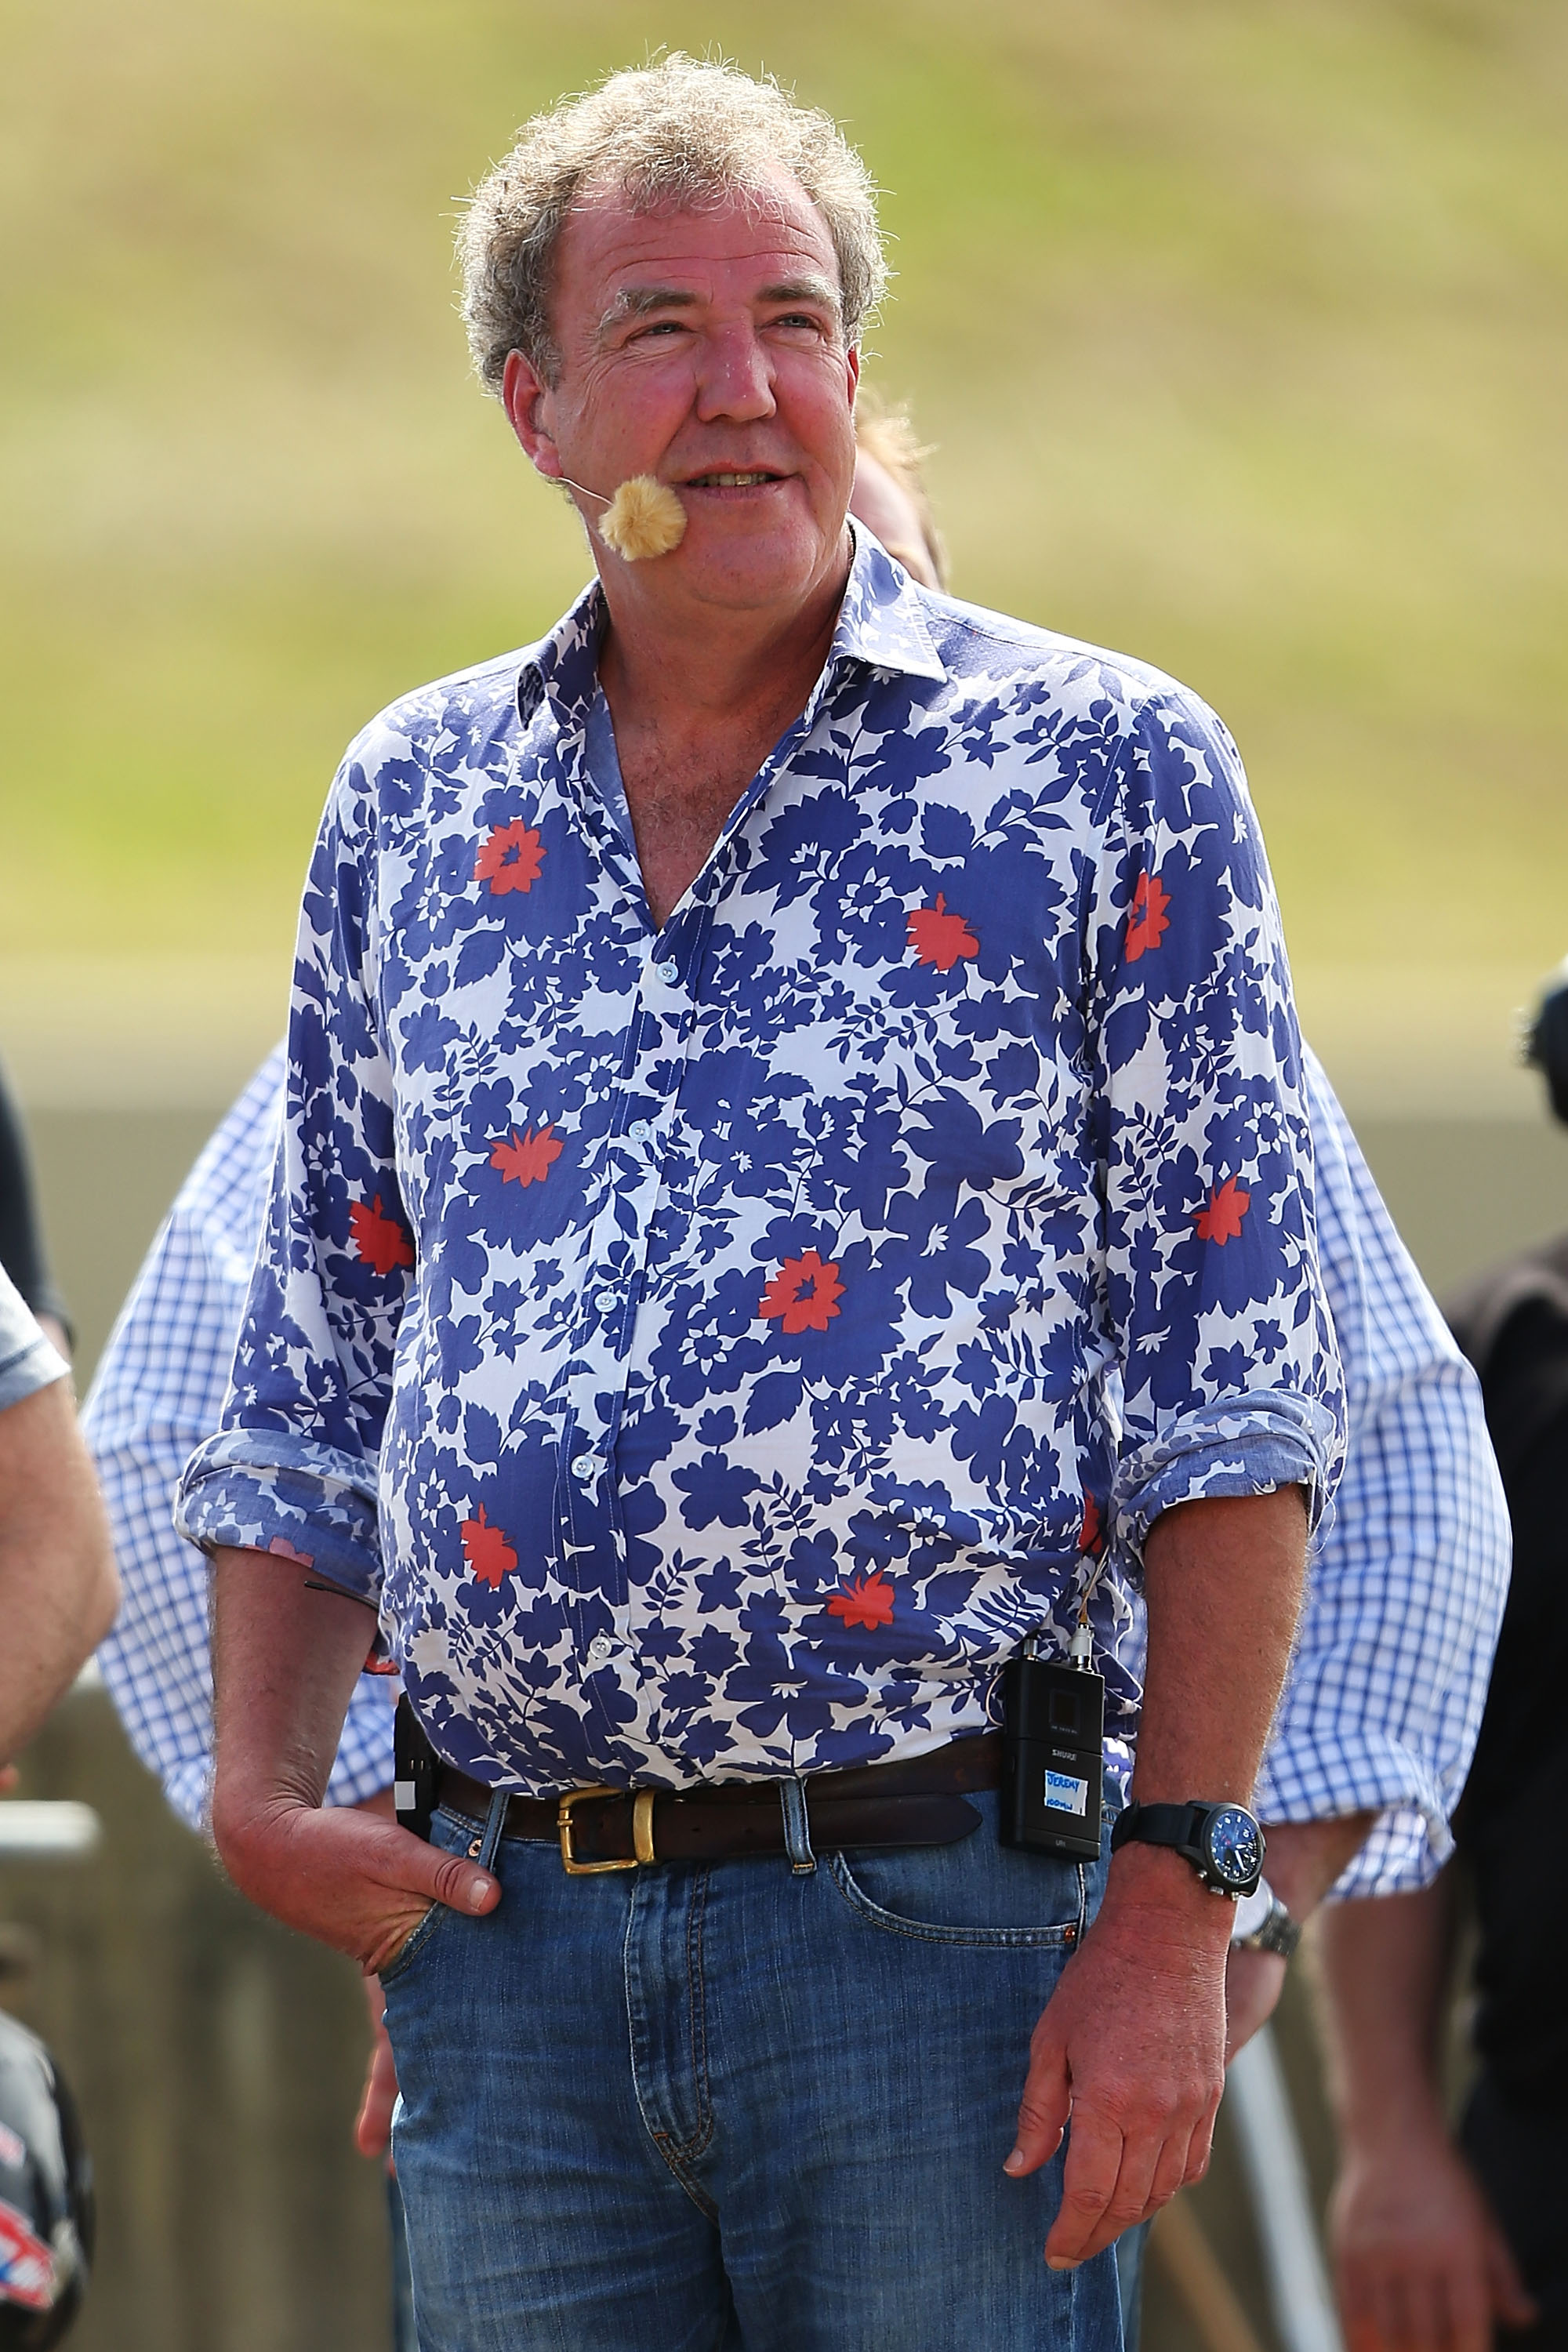 Jeremy Clarkson during the Top Gear Festival on March 9, 2013 in Sydney, Australia | Source: Getty Images